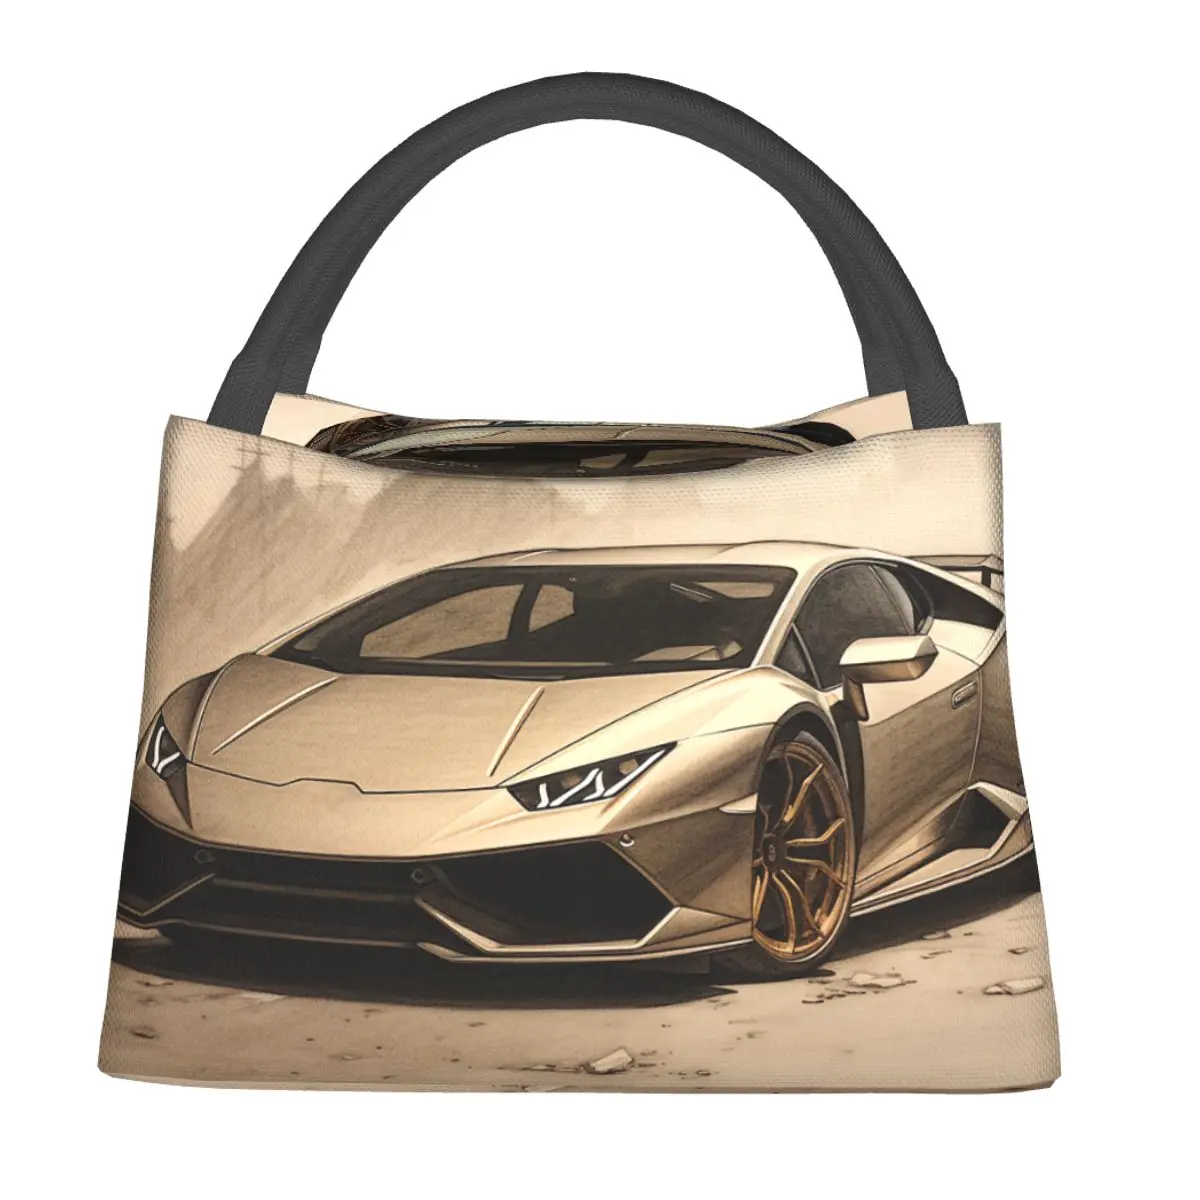 

Noble Sports Car Lunch Bag Pencil Drawing Schematics Fun Lunch Box For Women Picnic Convenient Cooler Bag Design Tote Food Bags